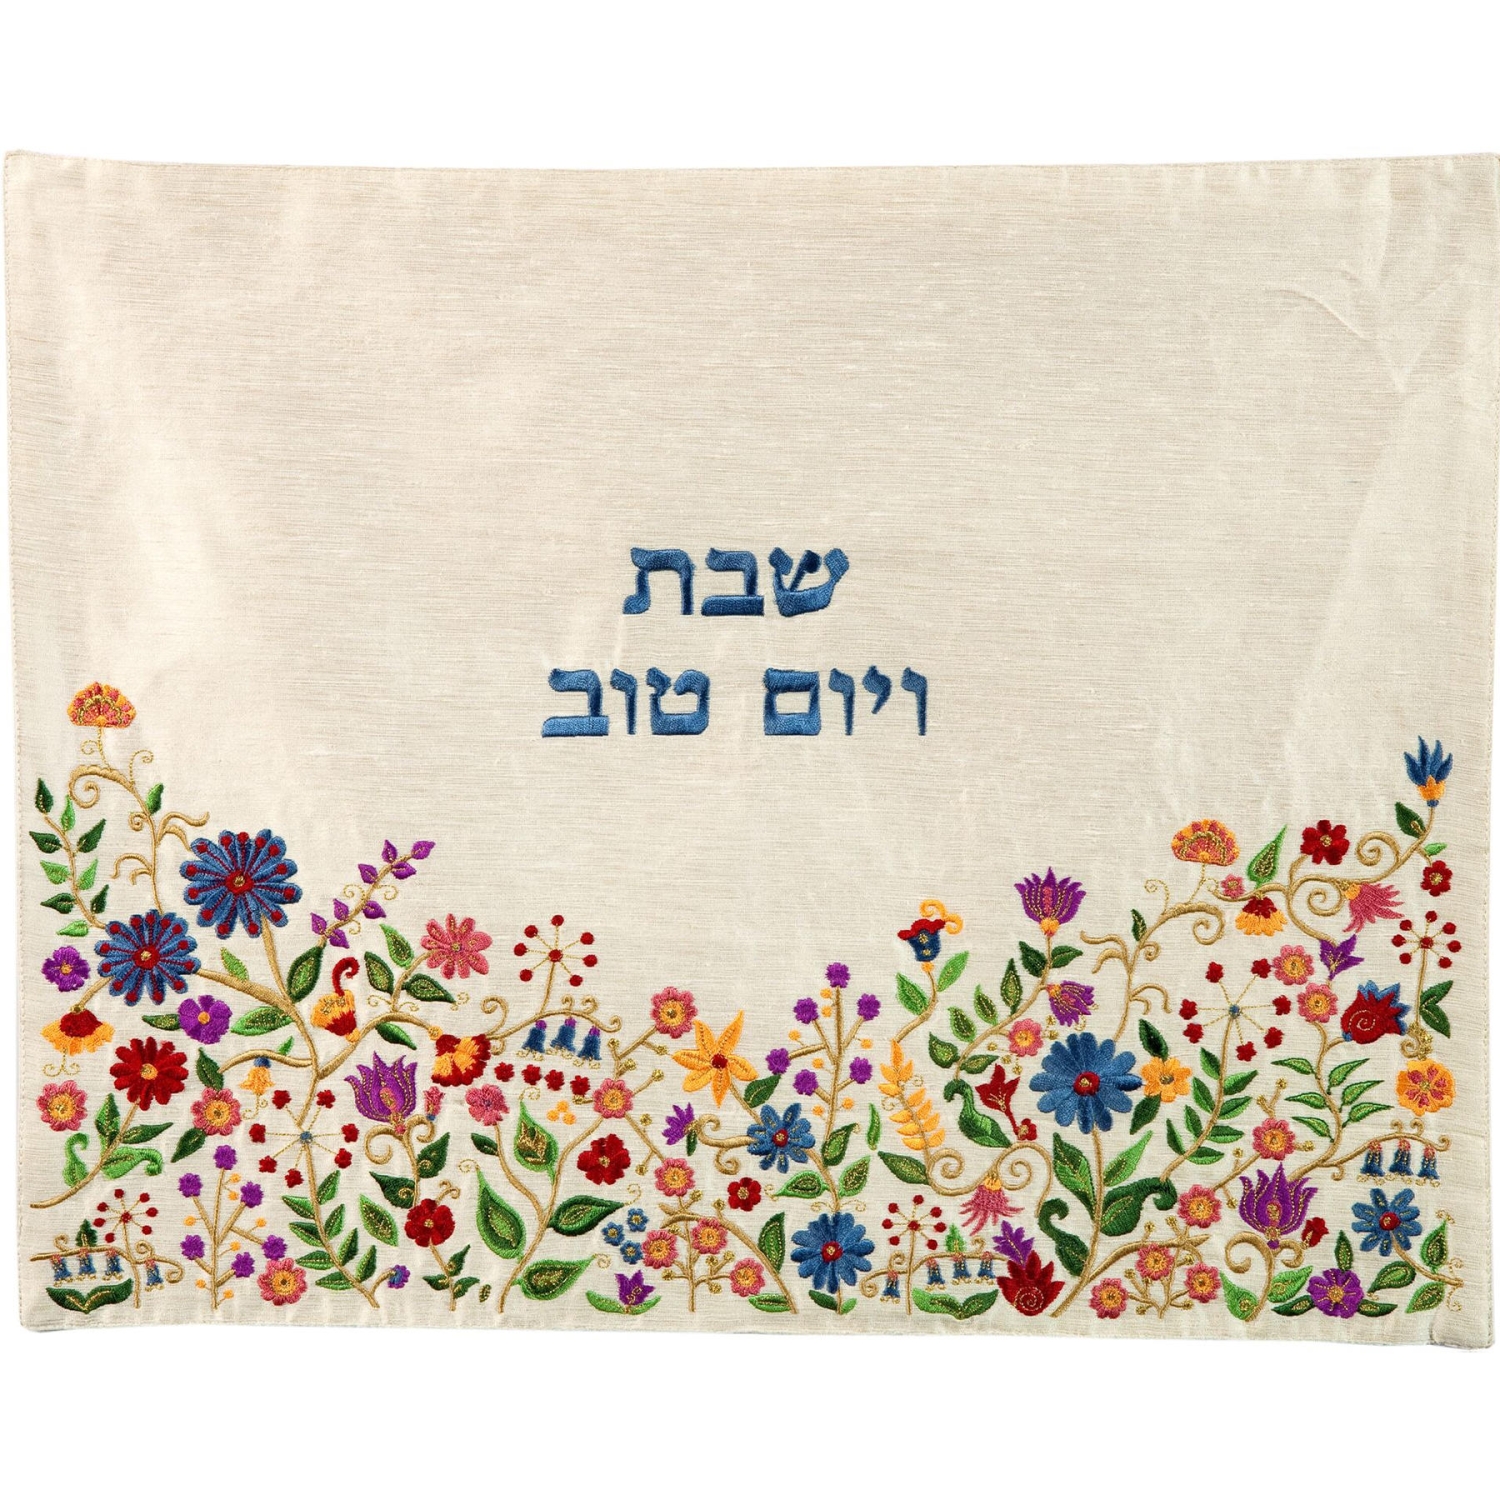 Yair Emanuel Flowers Embroidered Challah Cover - Choice of Colors - 1